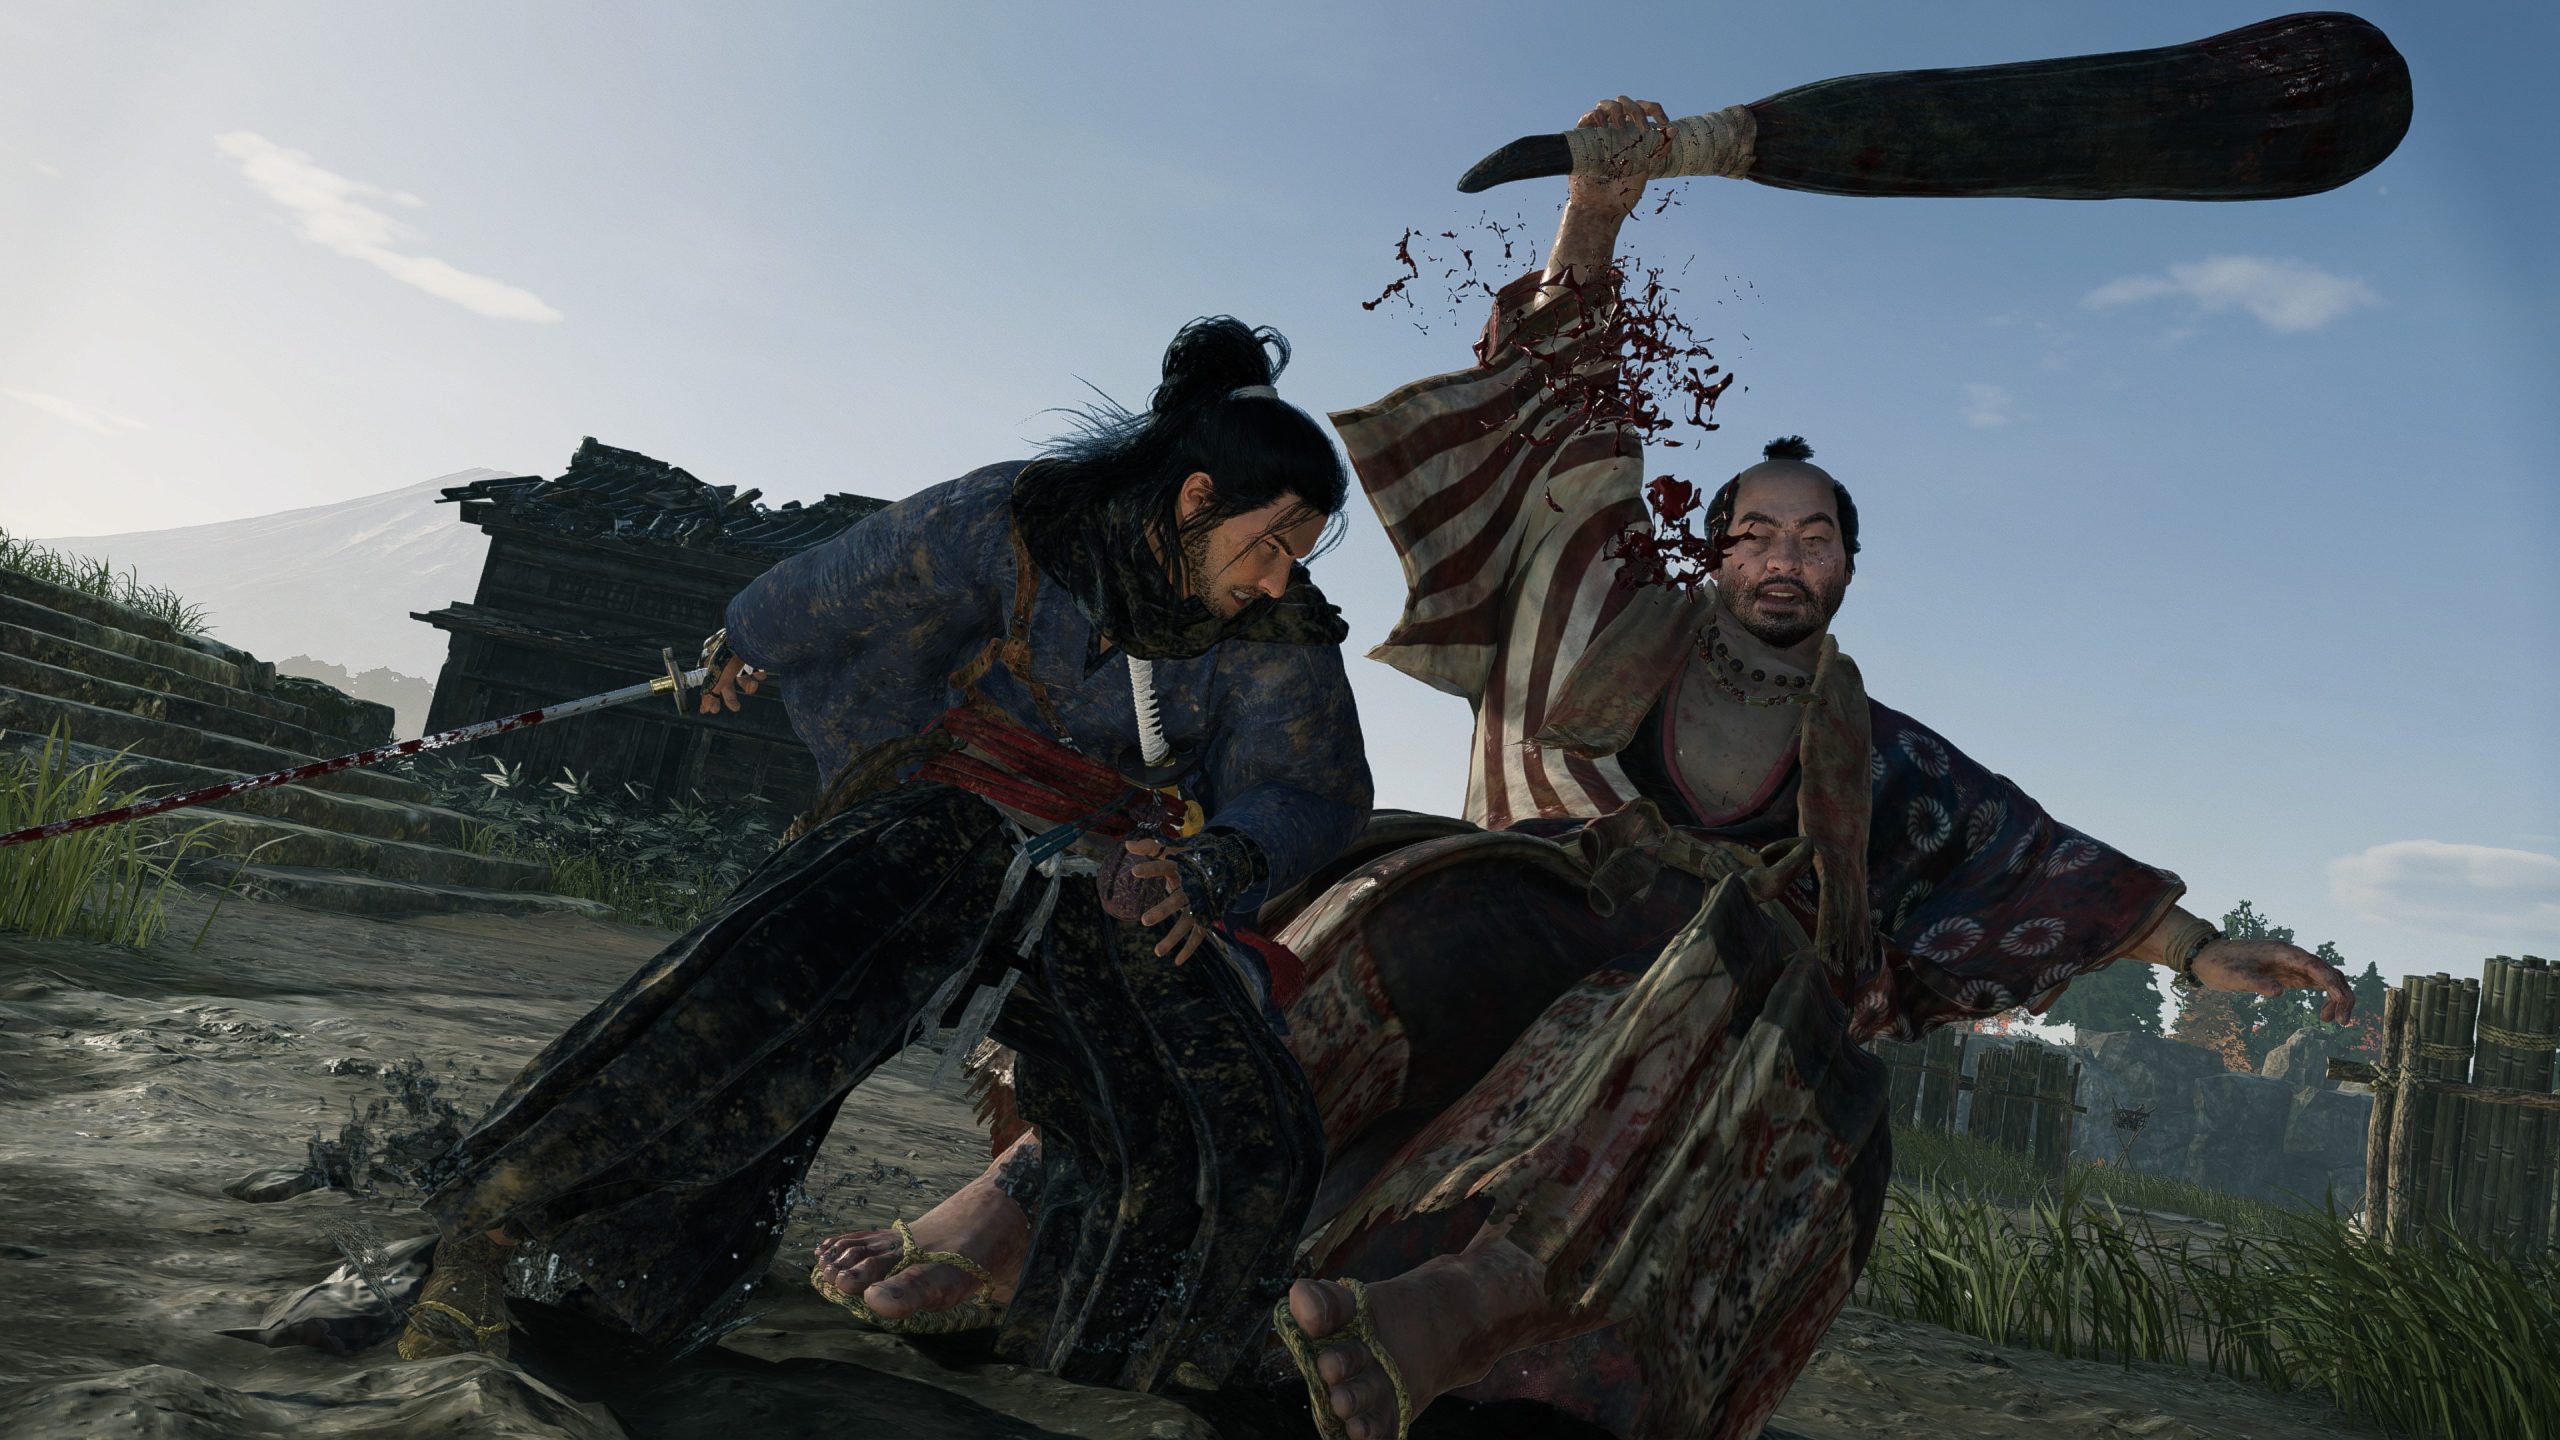 Rise of the Ronin Tech Analysis – How Does Team Ninja’s Open-World Fare on a Technical Level?